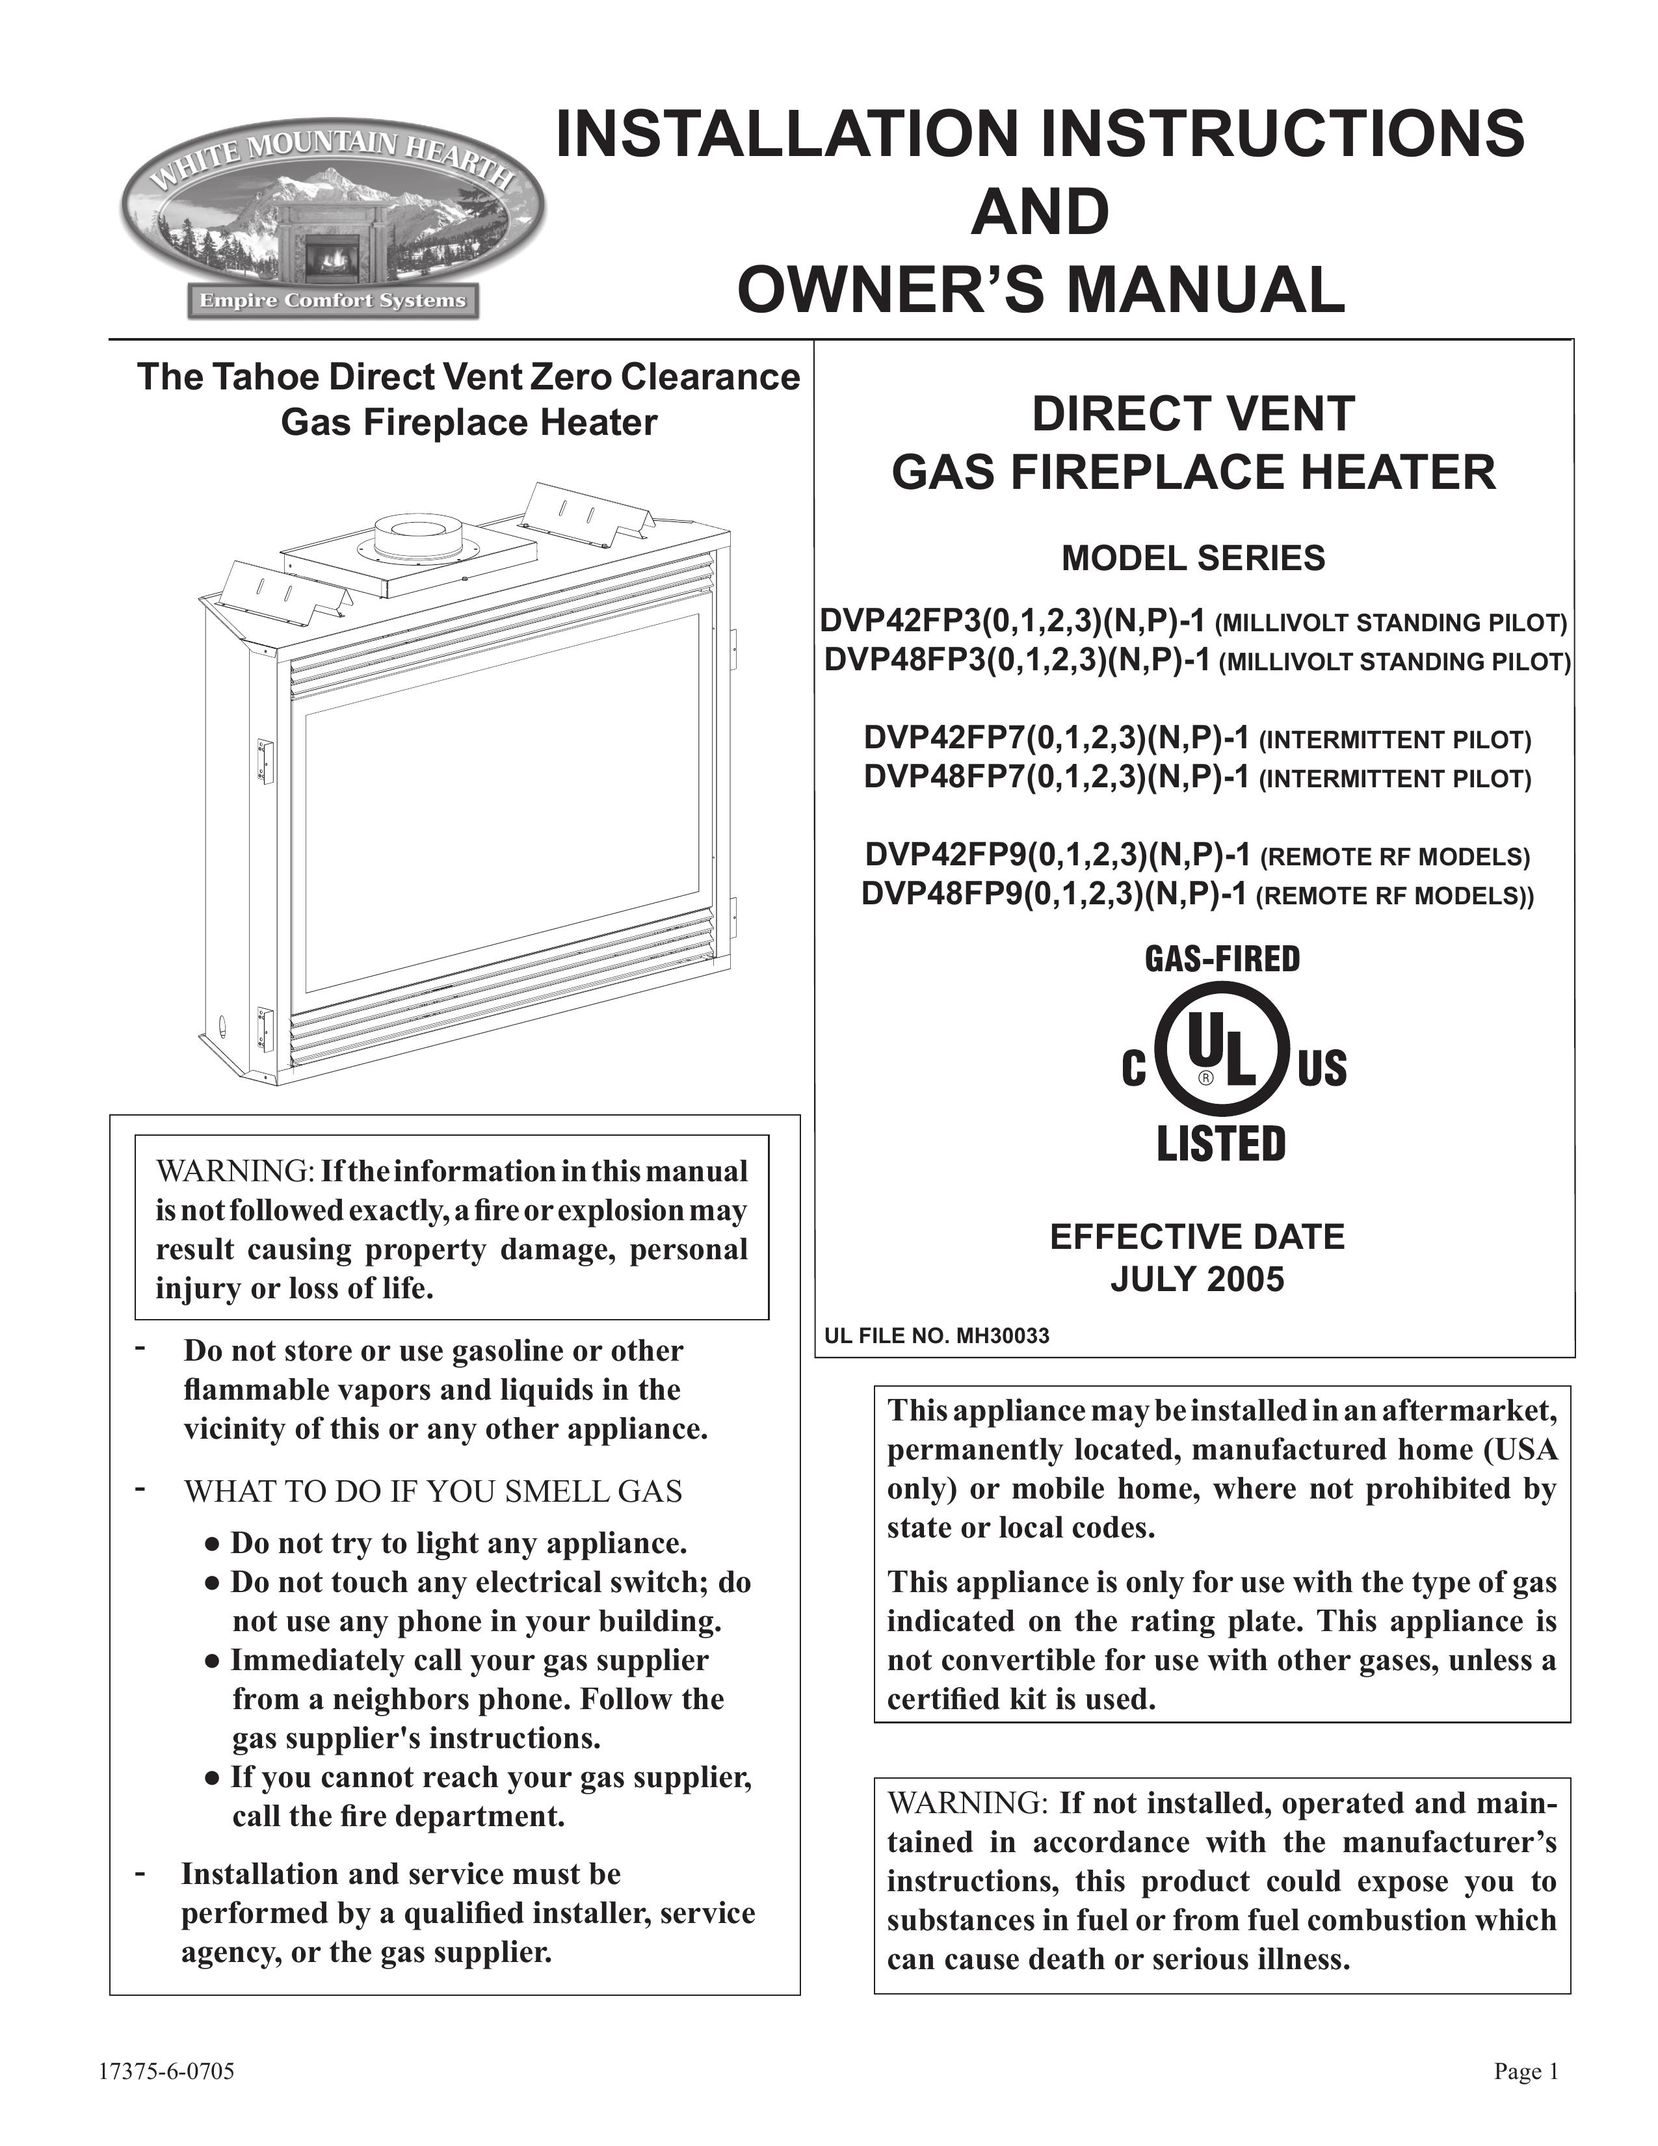 Empire Comfort Systems DVP48FP9 Water Heater User Manual